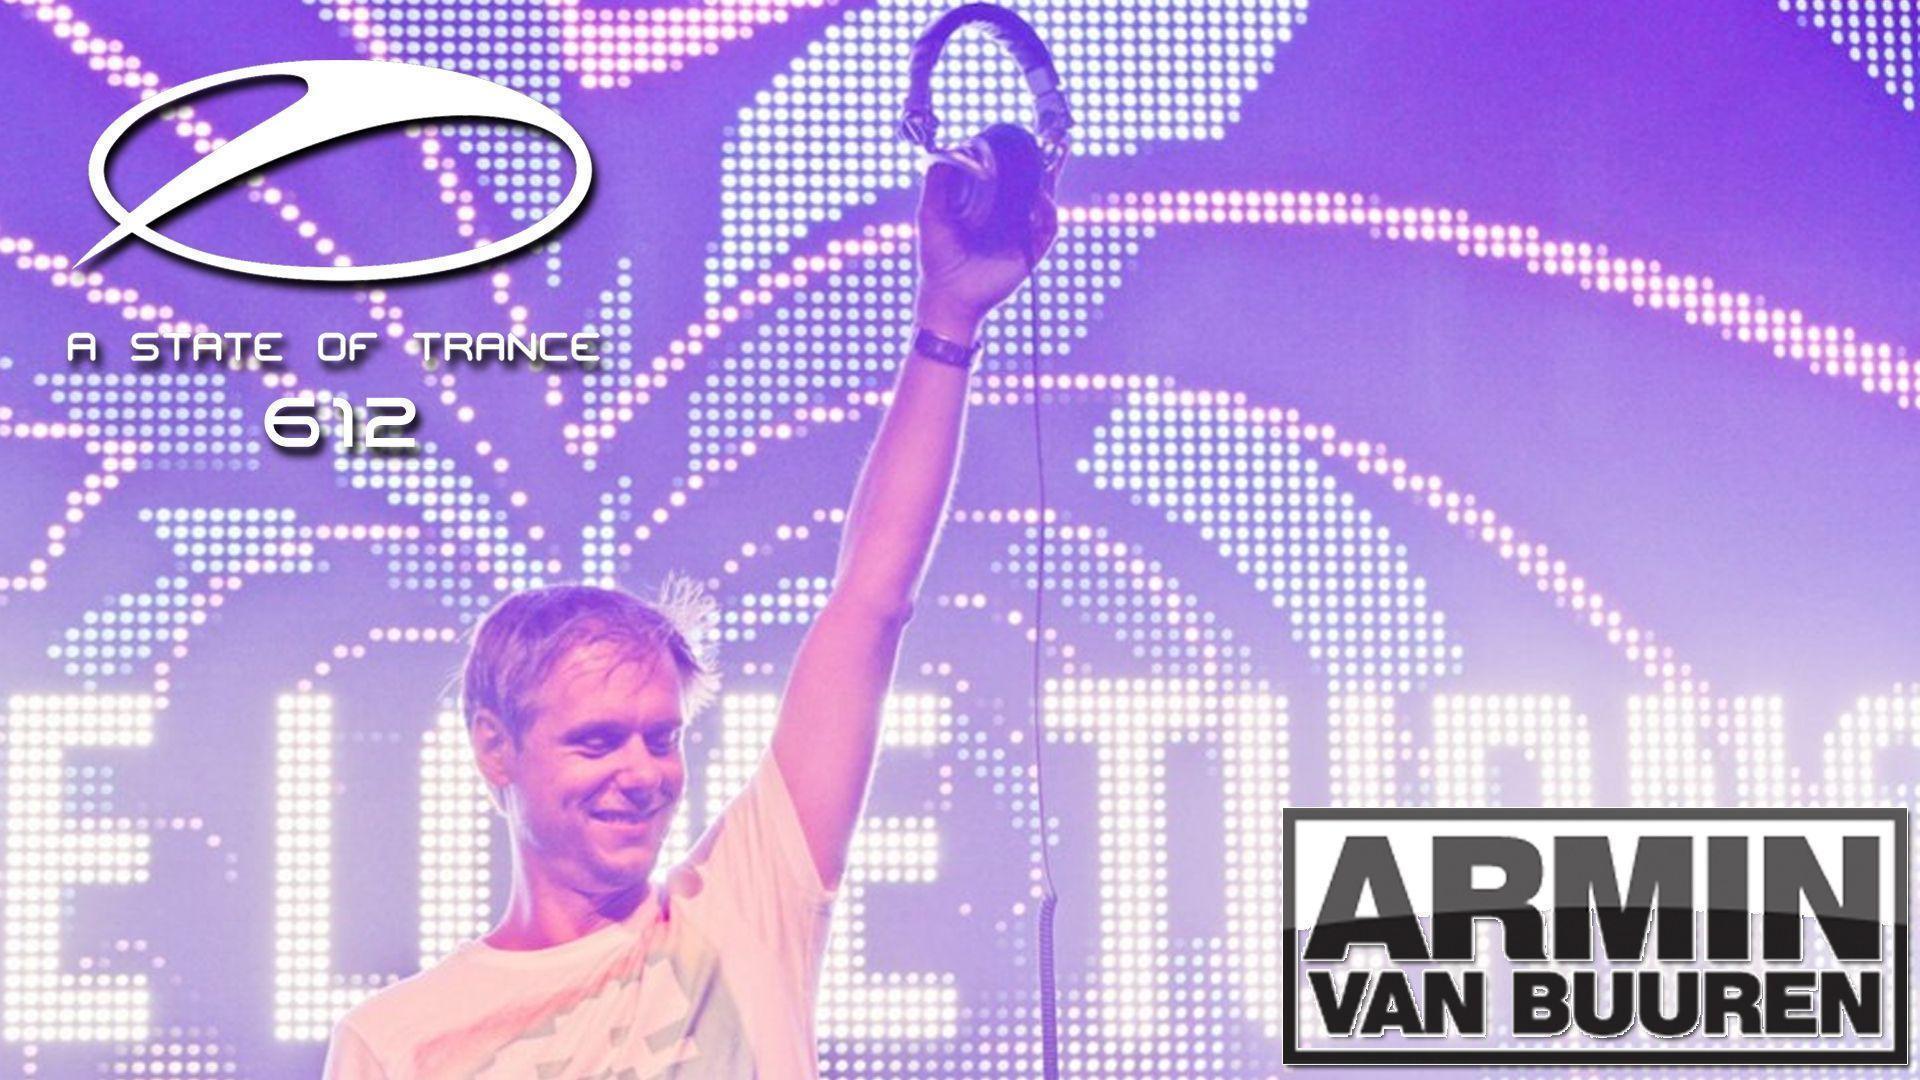 A State Of Trance 700 Part1 (29.01.2015) with Armin van Buuren